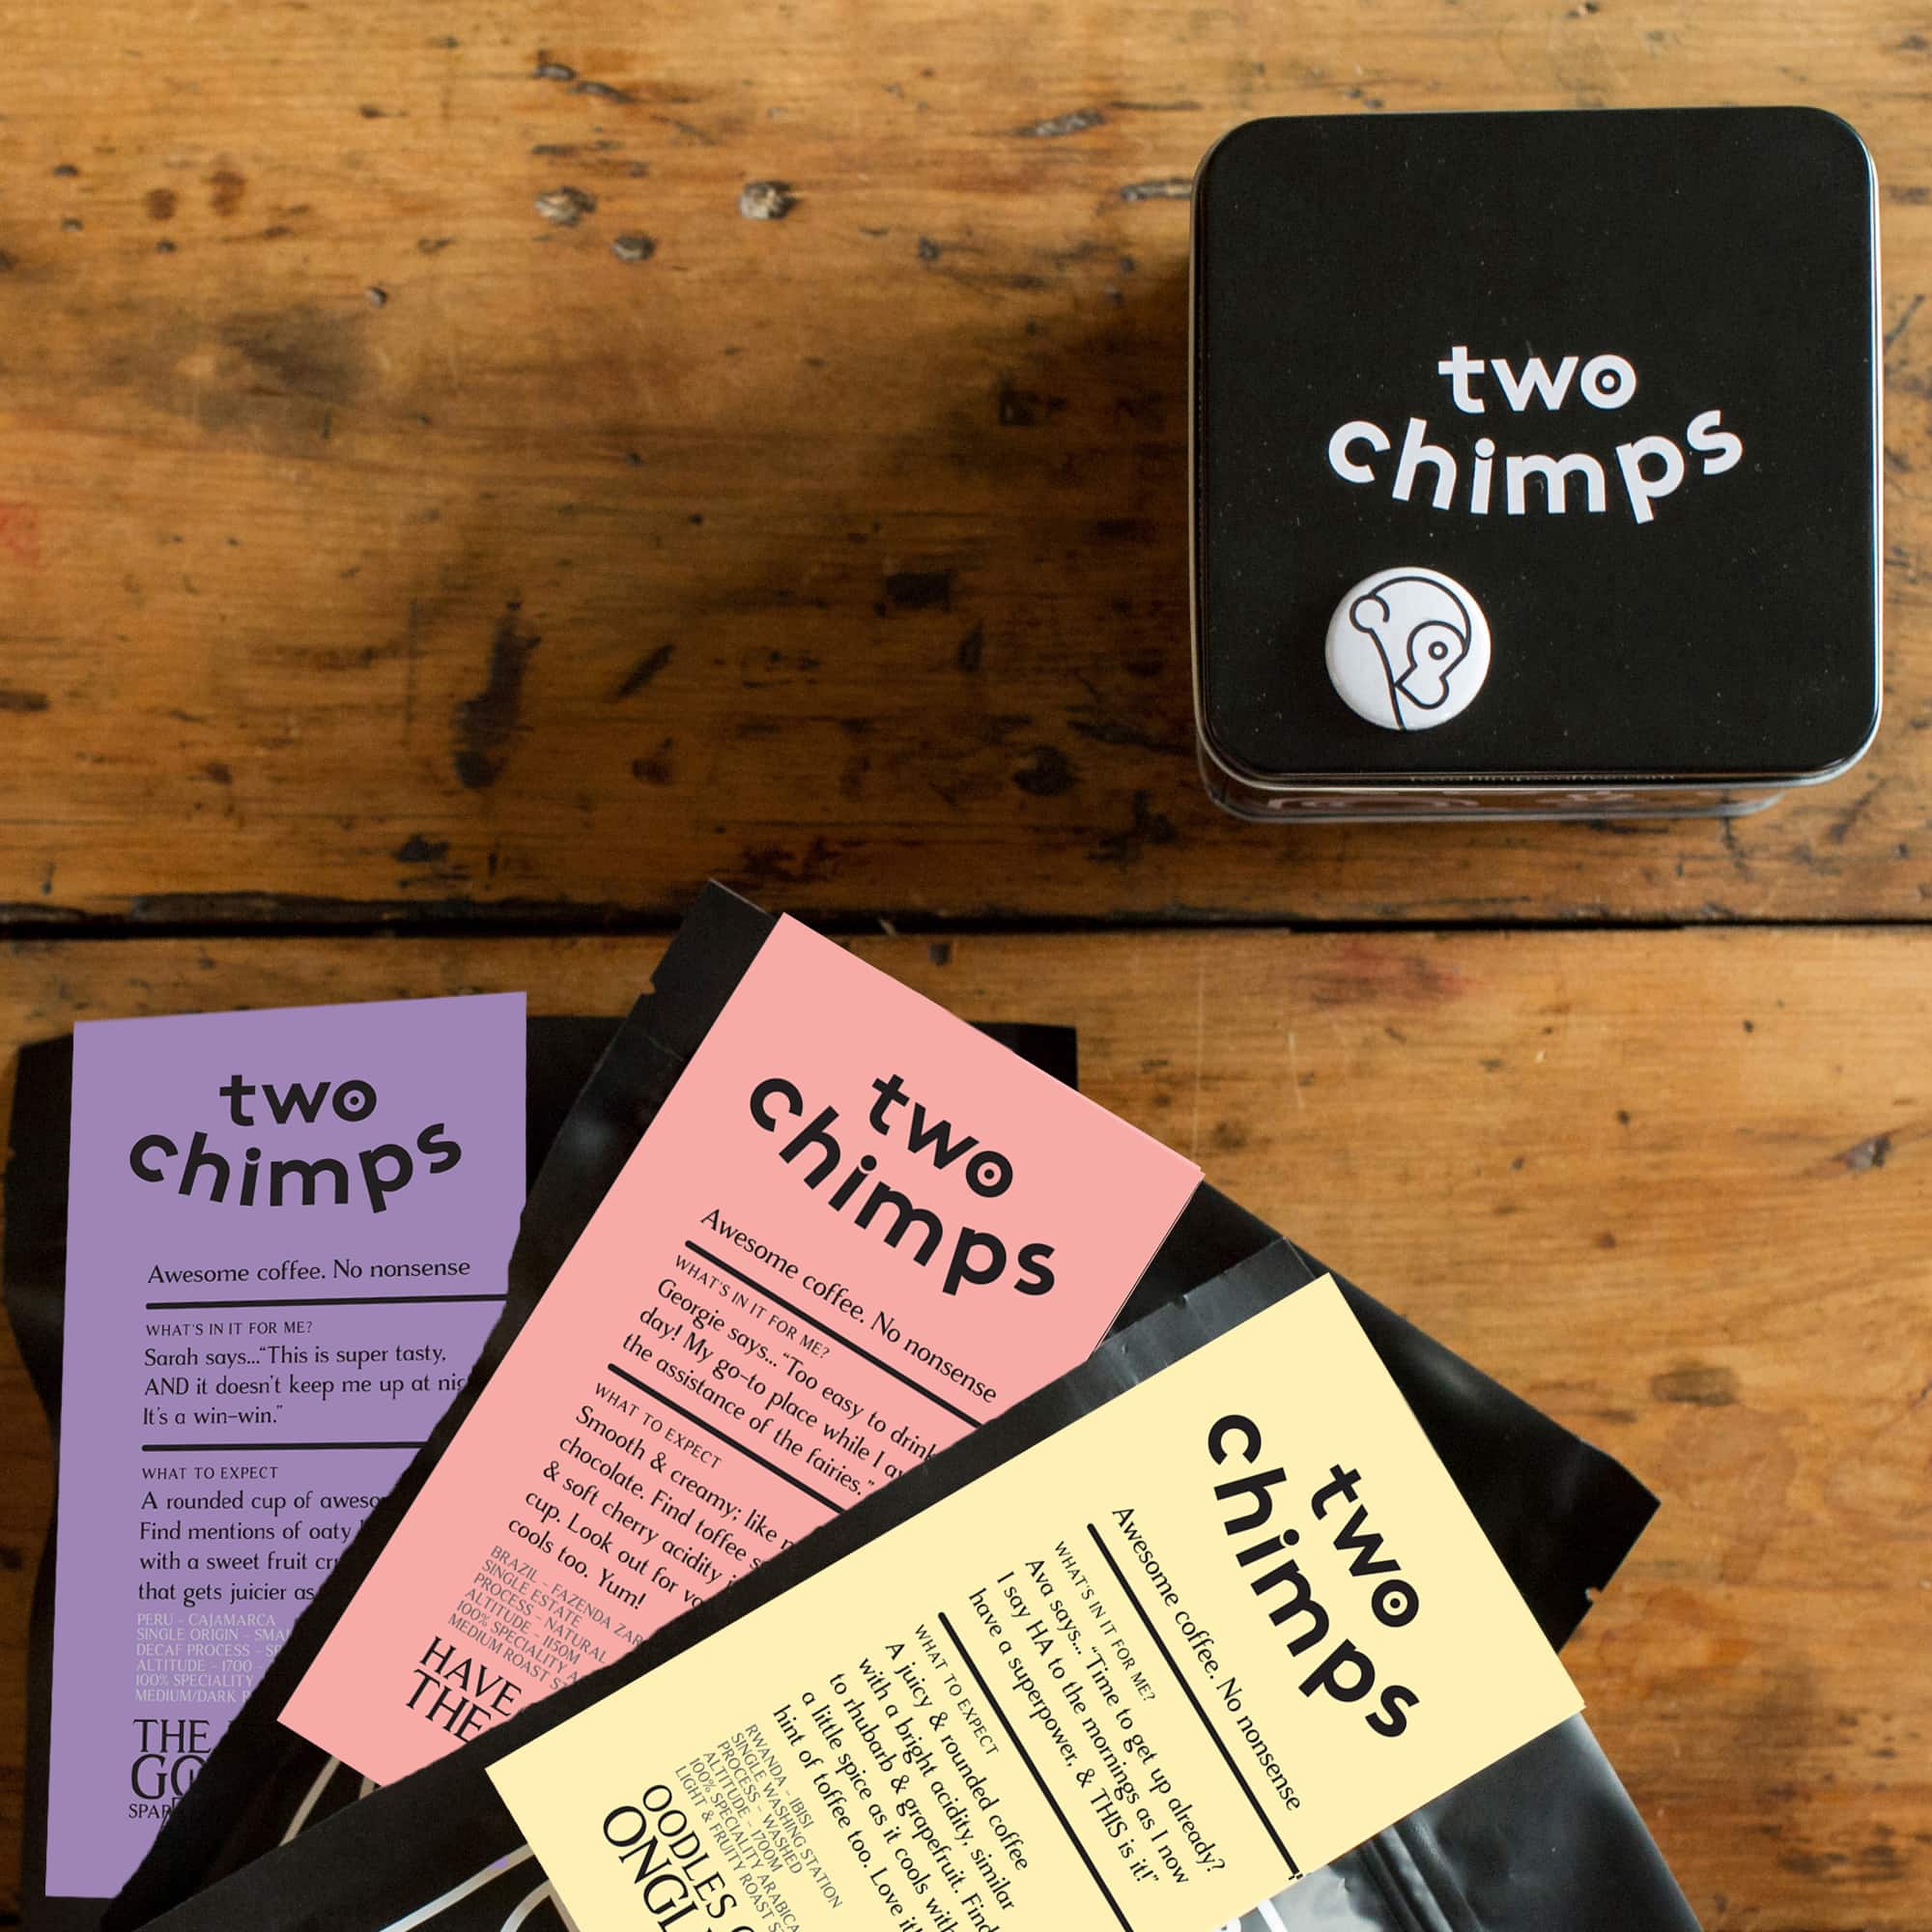 set of three coffees on the table with tin - two chimps coffee